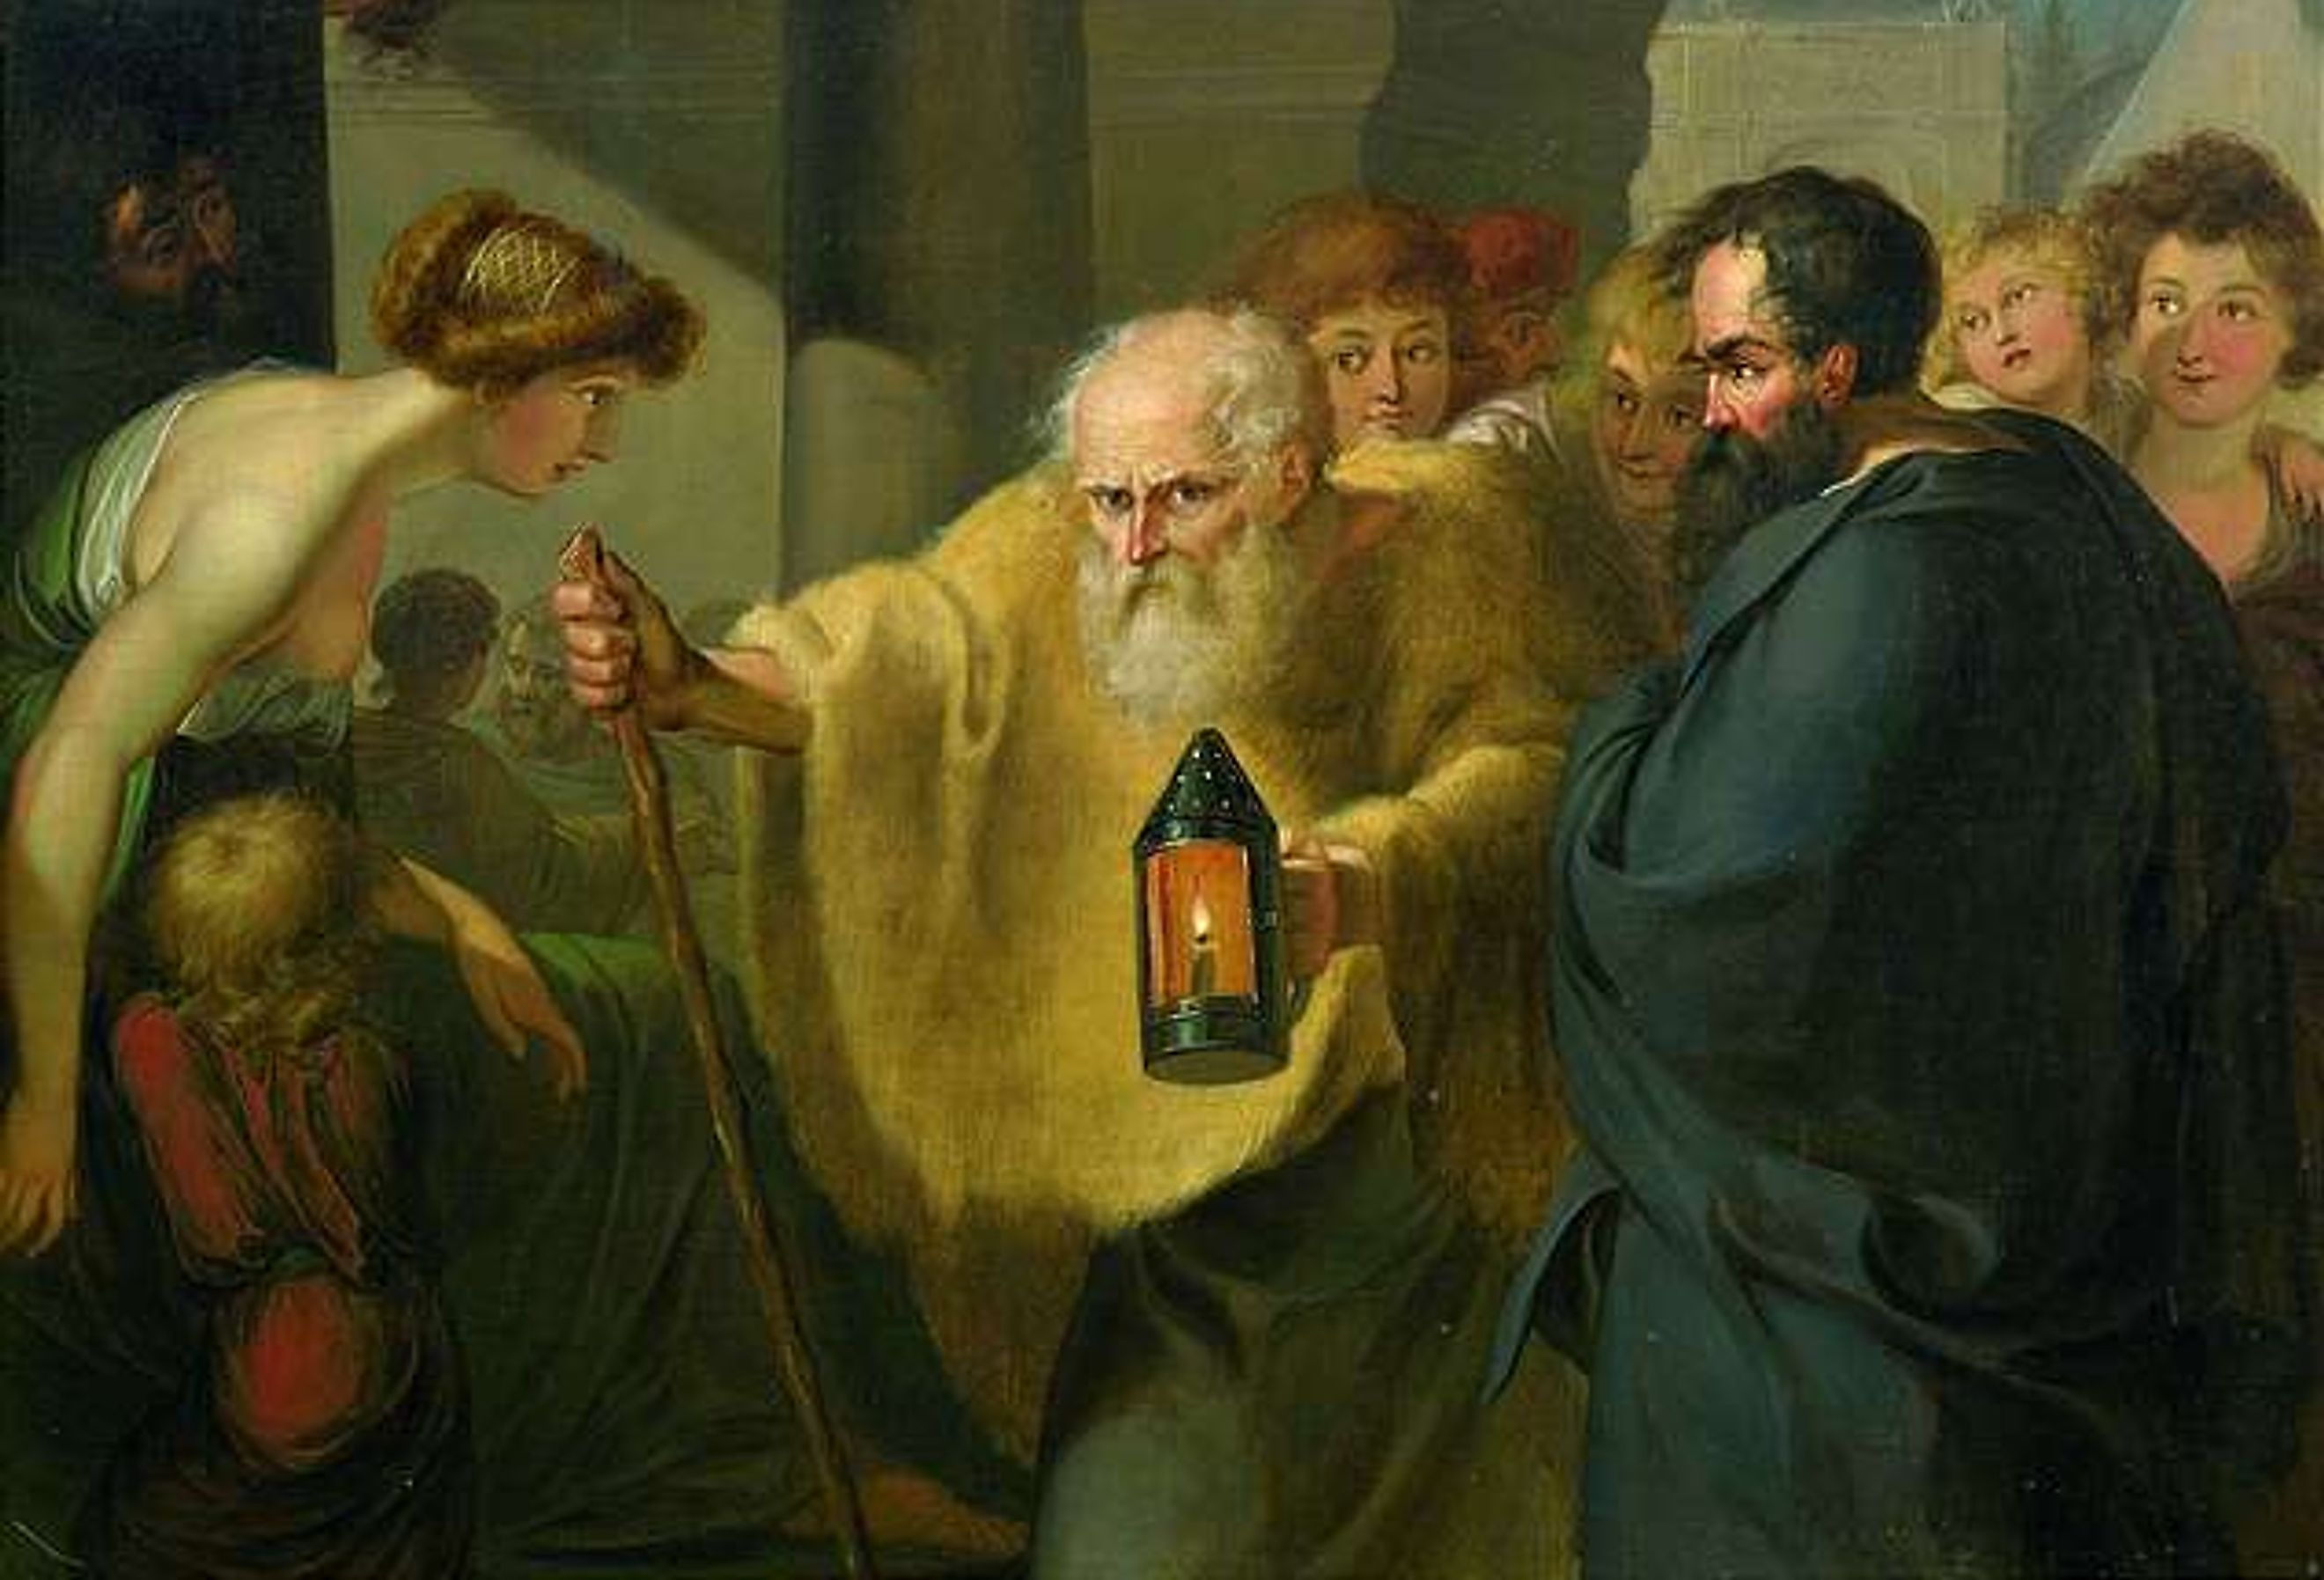 Diogenes, the Critic, looking for an honest man.